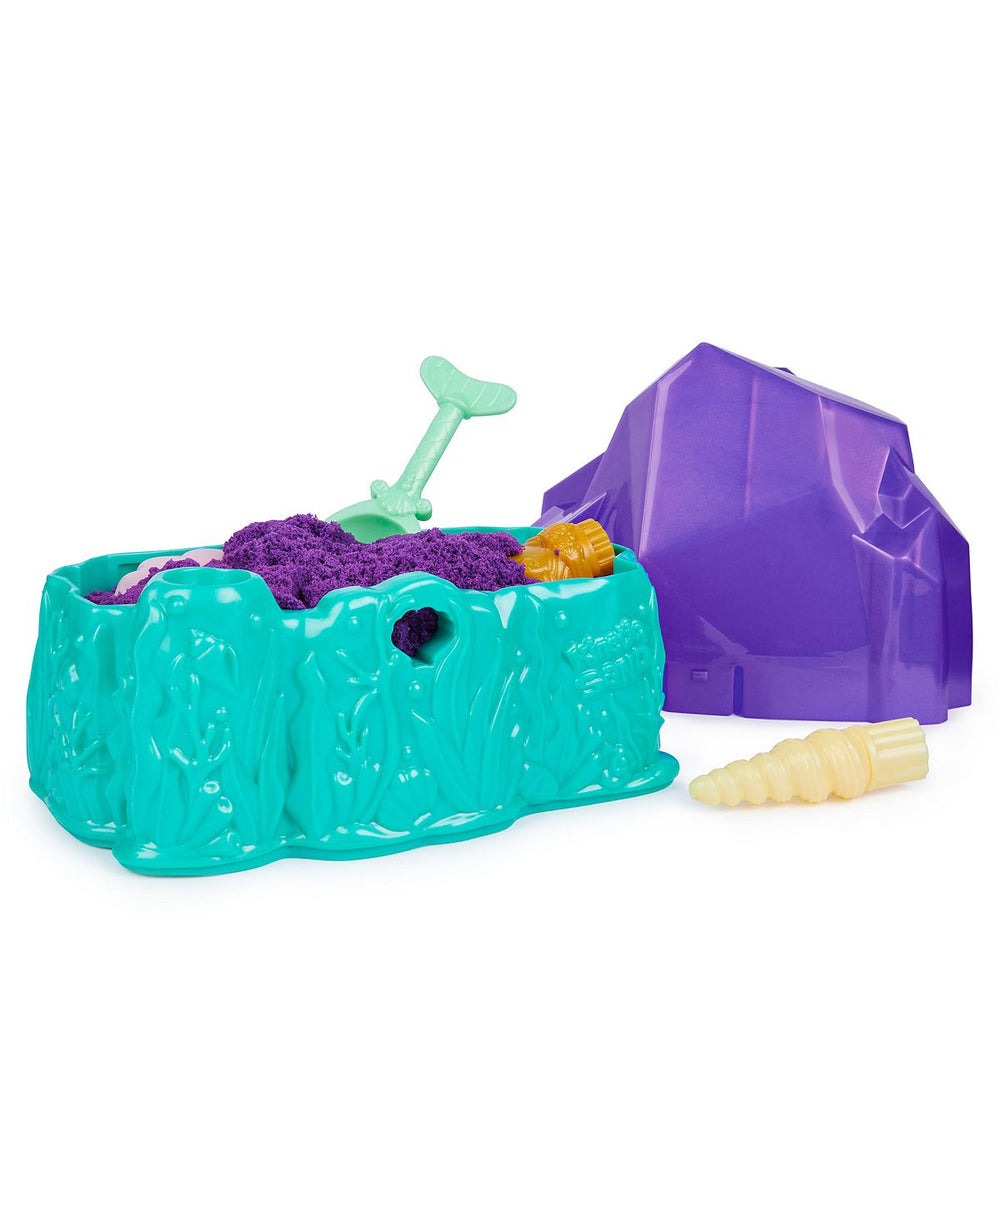 Kinetic Sand Mermaid Crystal Playset with Shimmer Gold Sand and Storage Tools